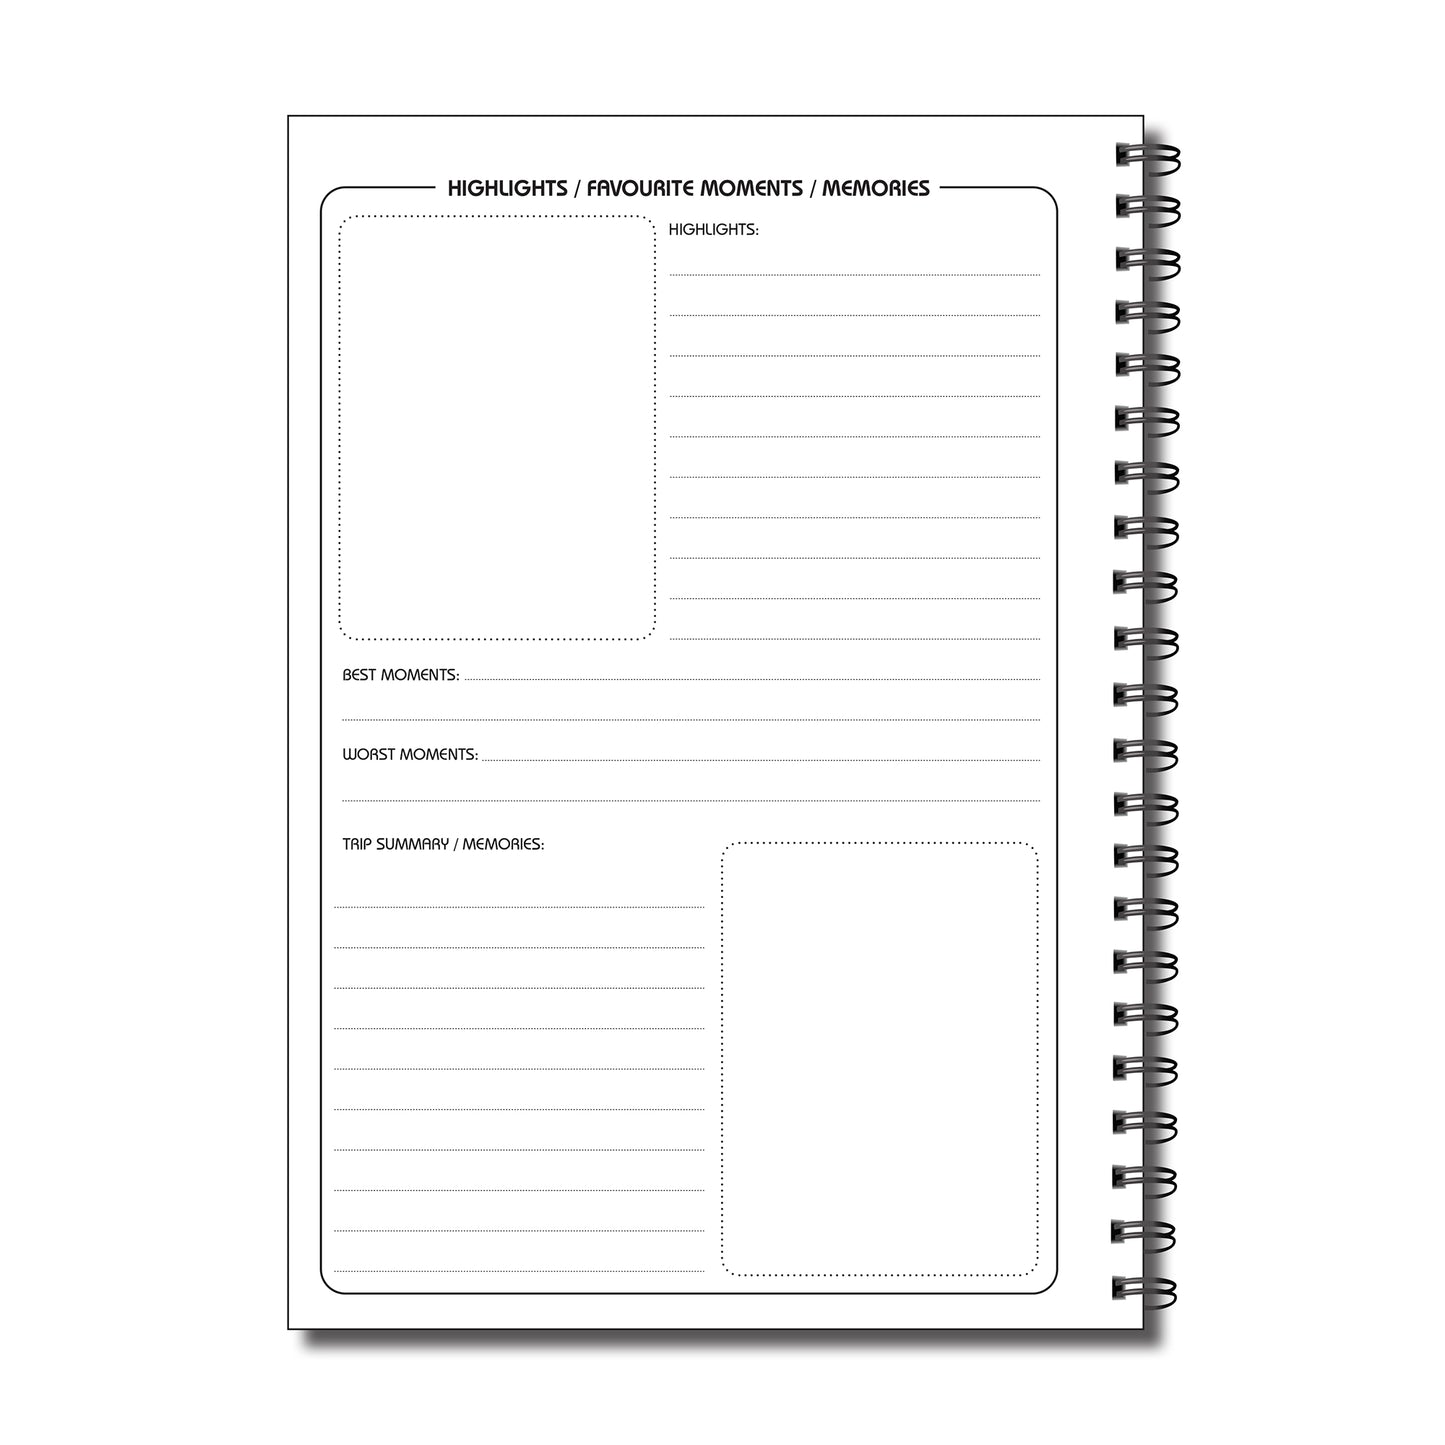 PERSONALISED Travel Journal & Planner | 50 double sided pages | A5 148mm x 210mm | Quality 120gsm | Wirobound